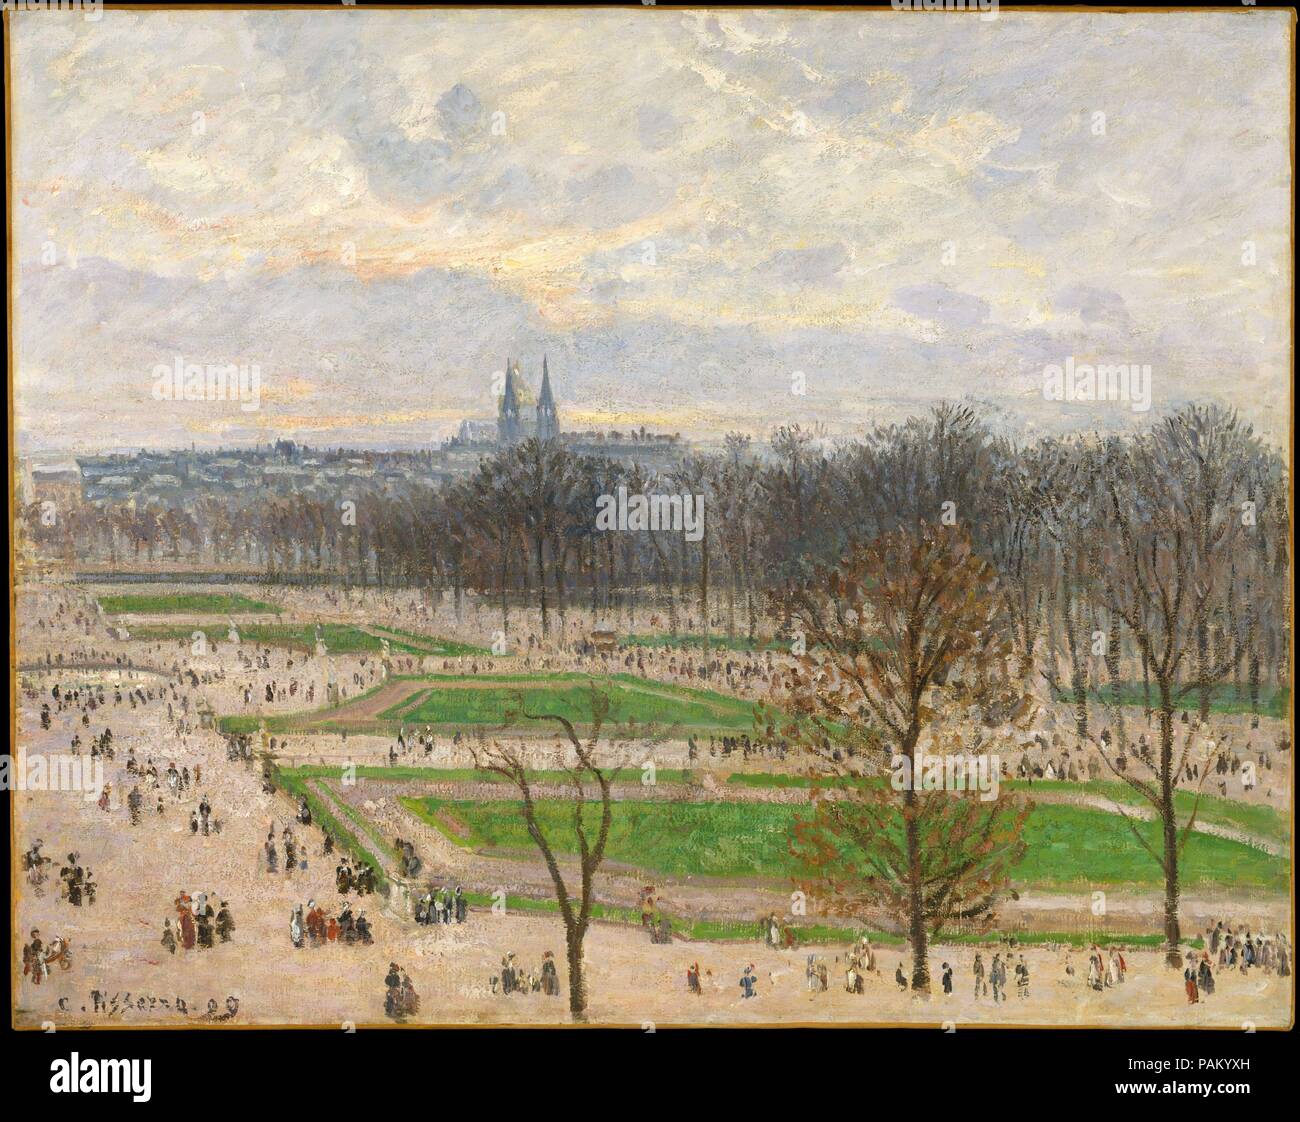 The Garden of the Tuileries on a Winter Afternoon. Artist: Camille Pissarro (French, Charlotte Amalie, Saint Thomas 1830-1903 Paris). Dimensions: 29 x 36 1/4 in. (73.7 x 92.1 cm). Date: 1899.  In December 1898 Pissarro wrote from Paris that he had 'engaged an apartment at 204 rue de Rivoli, opposite the Tuileries, with a superb view of the garden, the Louvre to the left, in the background the houses on the quays behind the trees, to the right the Dôme des Invalides, and the steeples of Sainte-Clotilde behind clumps of chestnut trees. It's very beautiful. I shall have a fine series to paint.' D Stock Photo